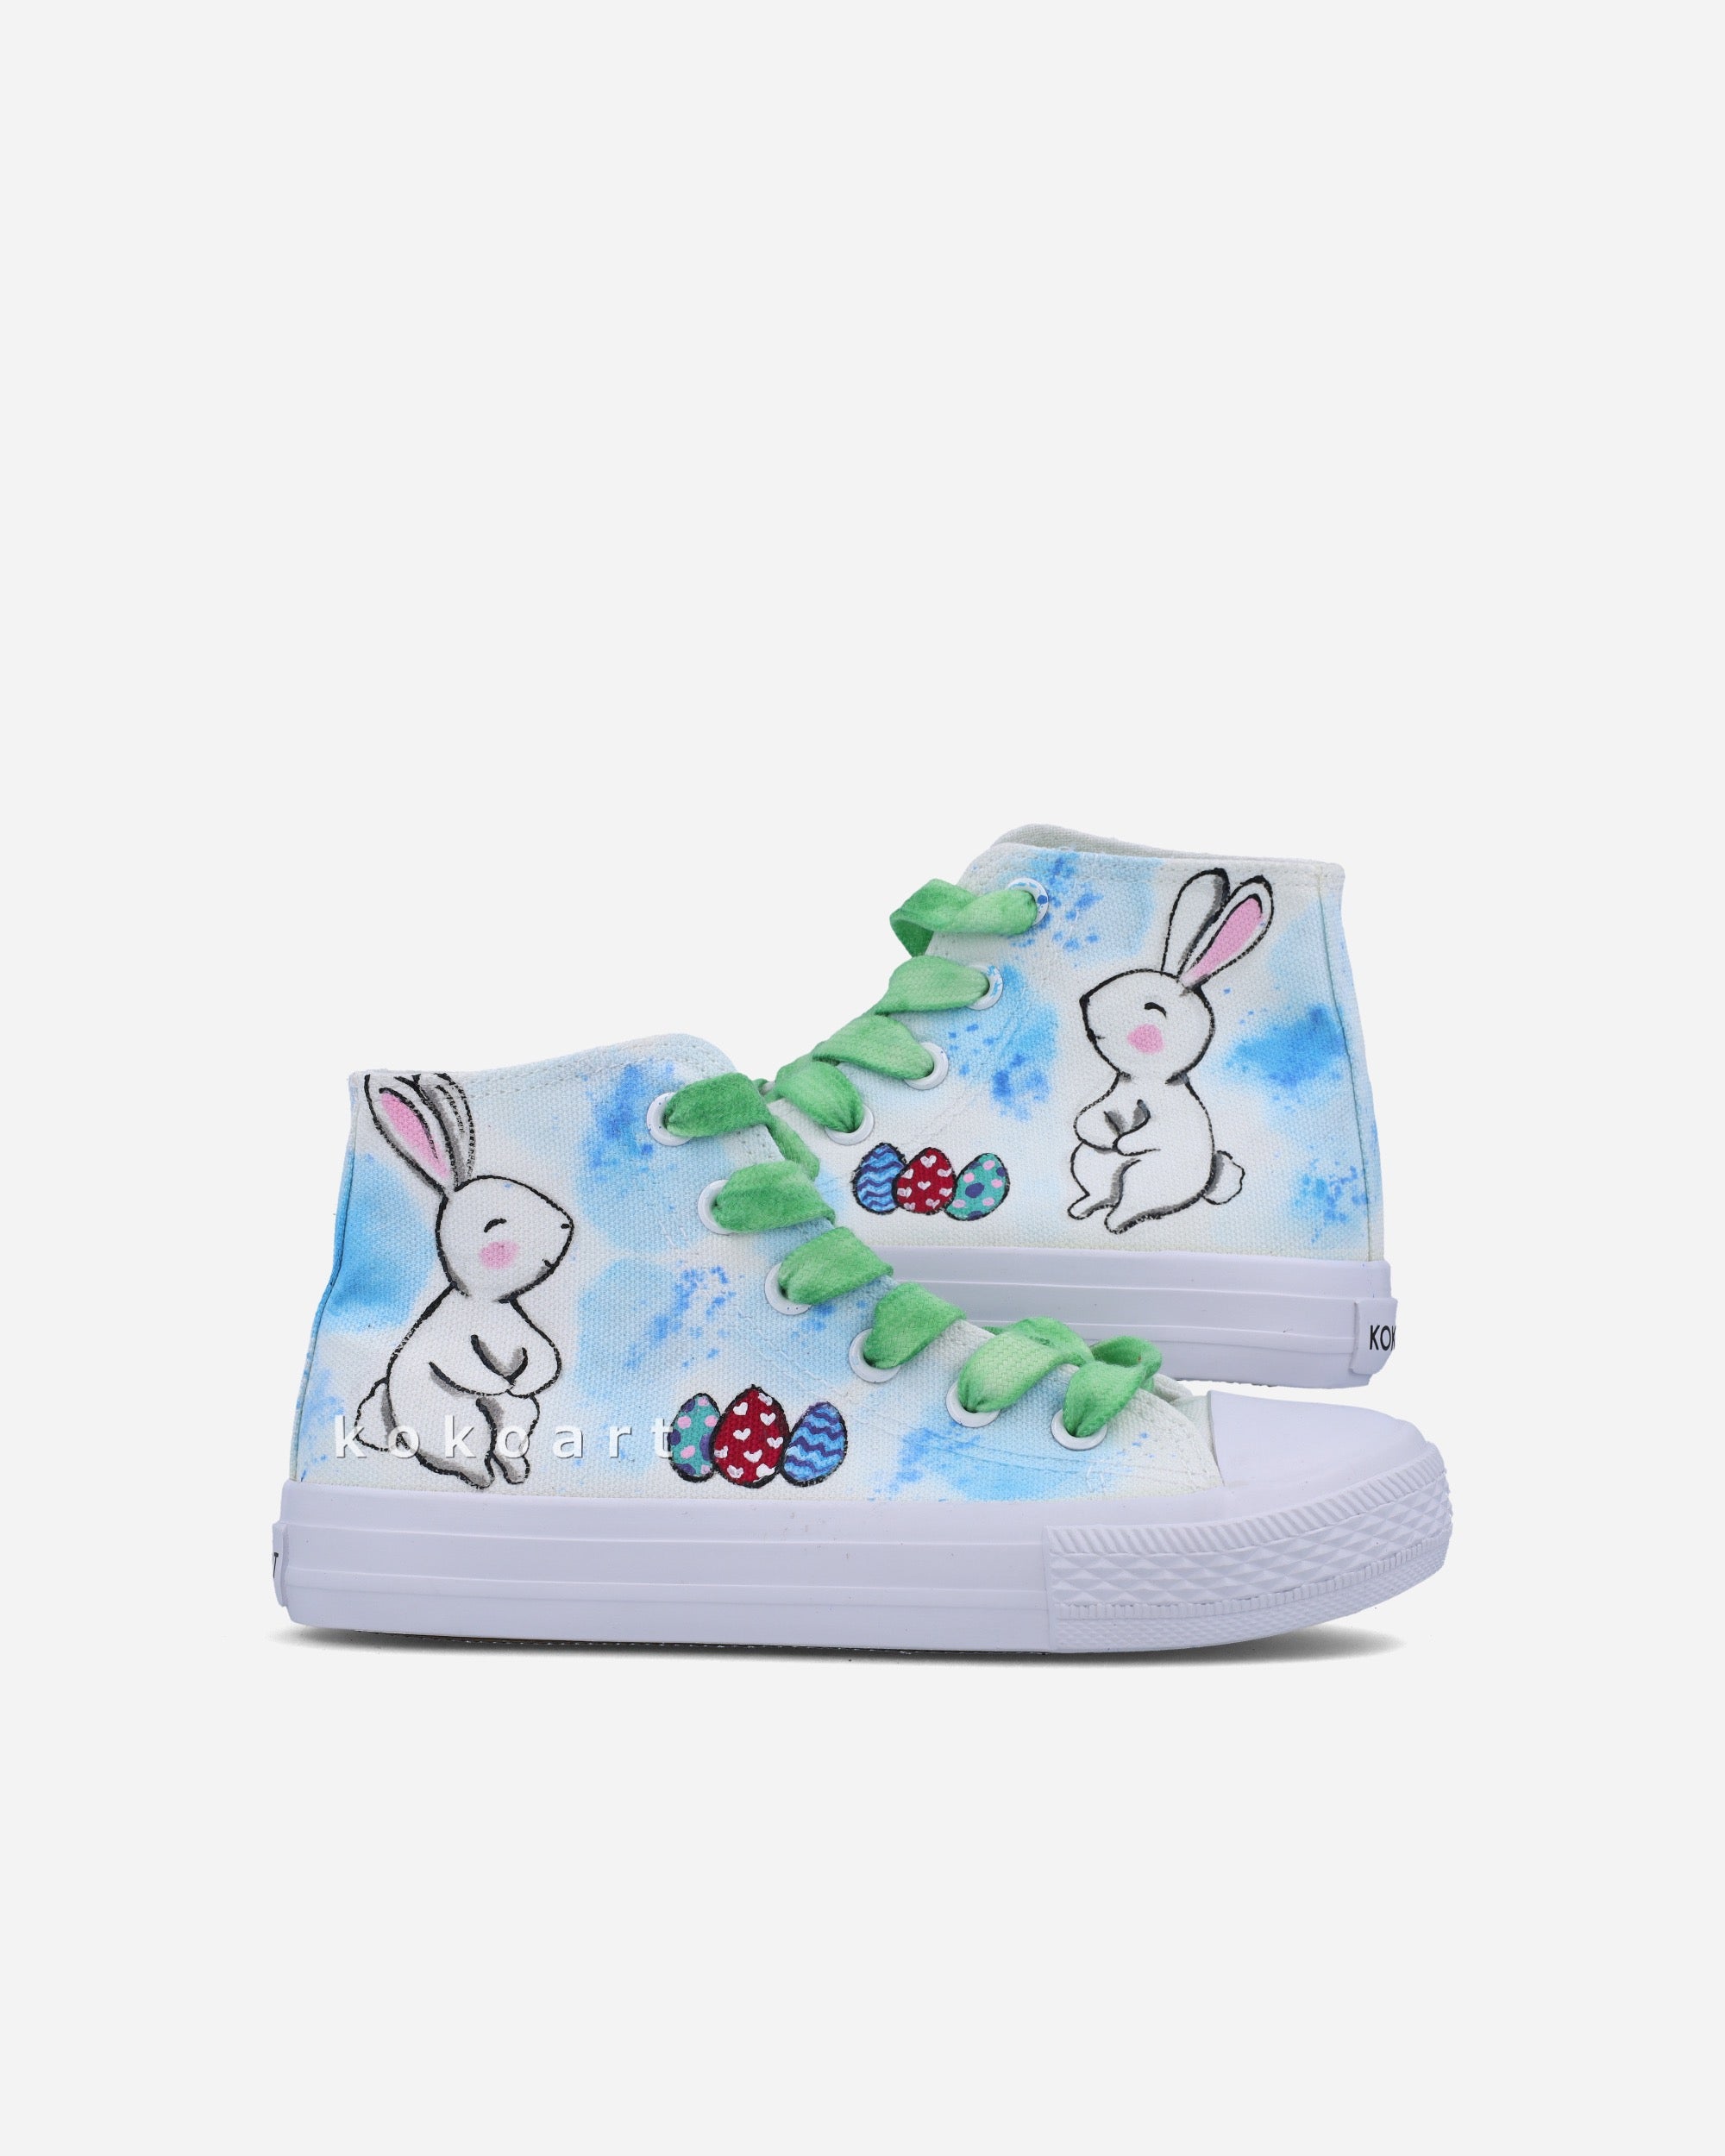 Heaster Bun Hand Painted Shoes